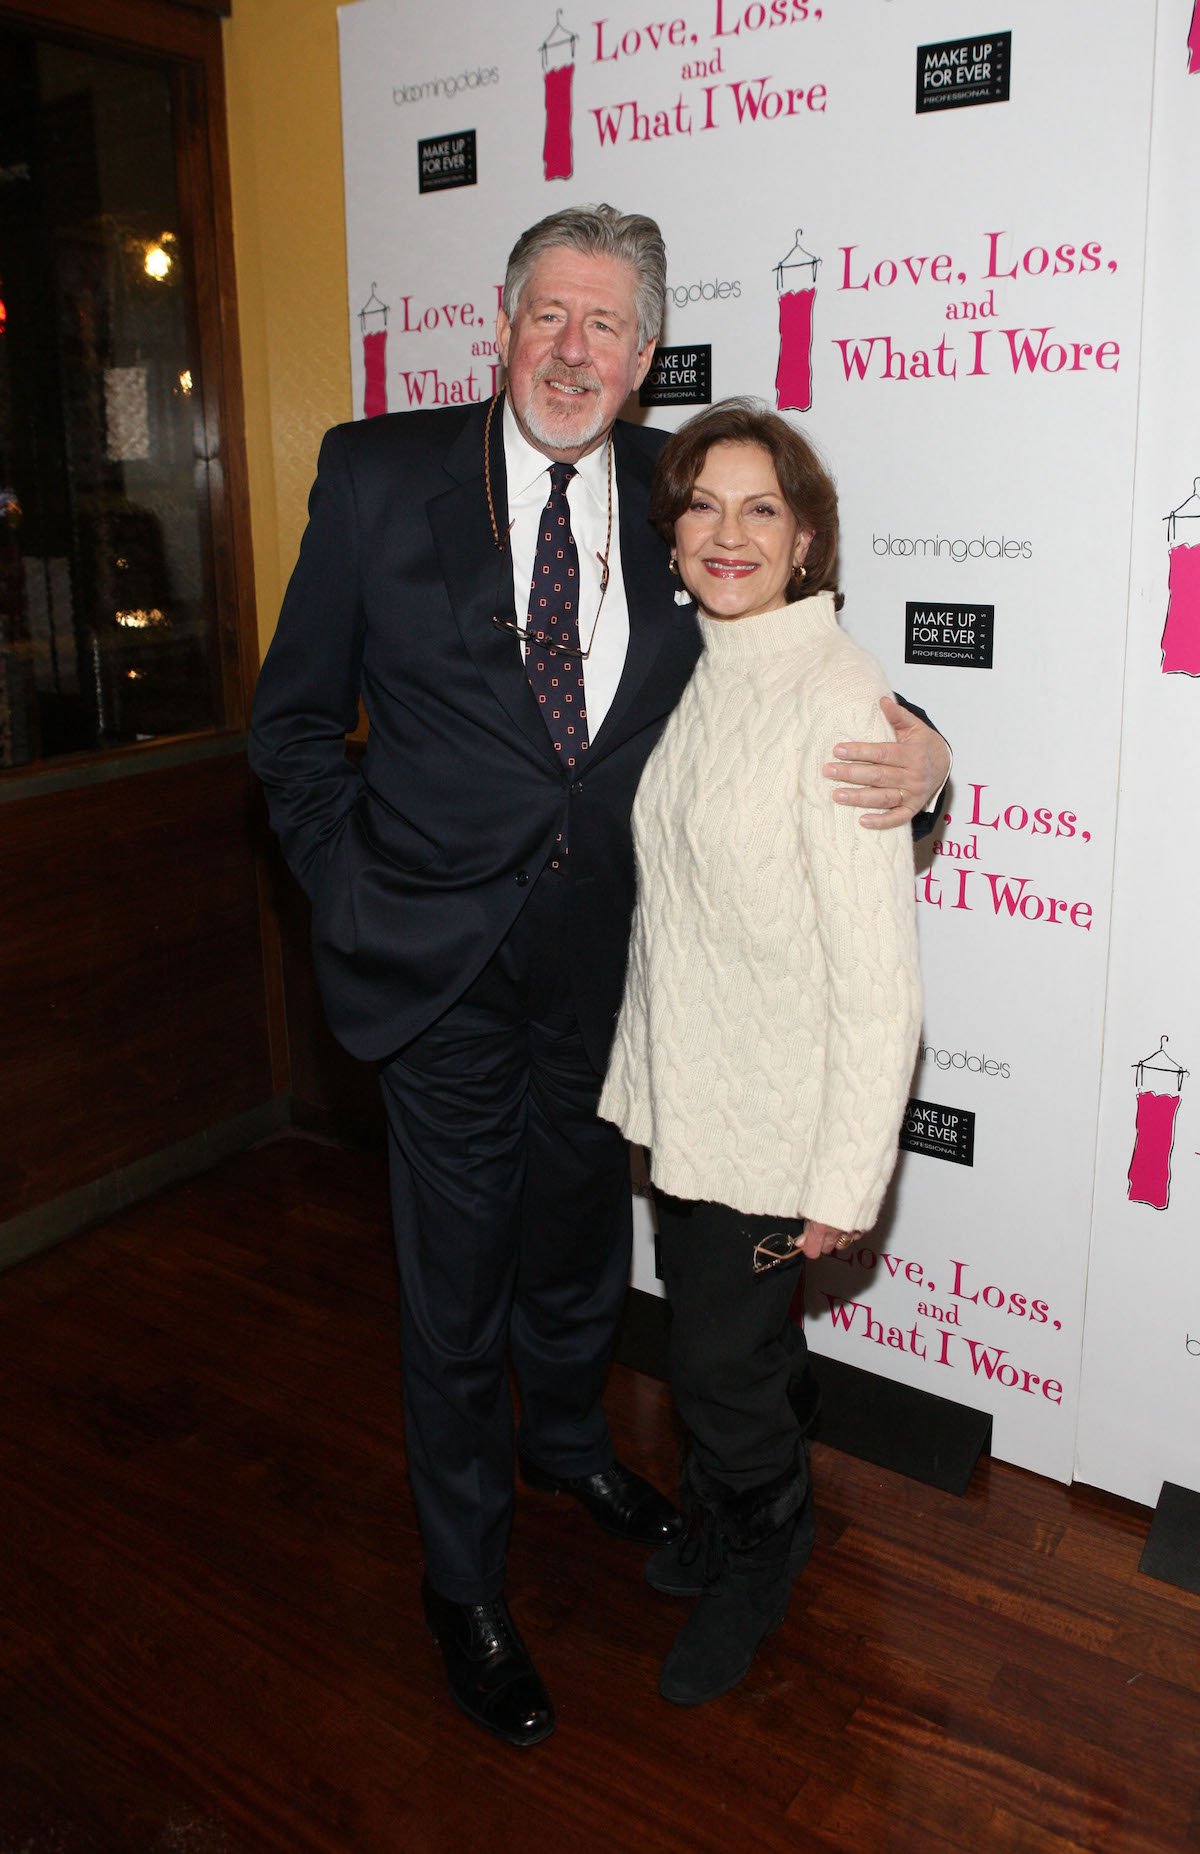 Edward Herrmann smiles as he puts his arm around his 'Gilmore Girls co-star, Kelly Bishop, at the 500th performance of 'Love, Loss, and What I Wore'